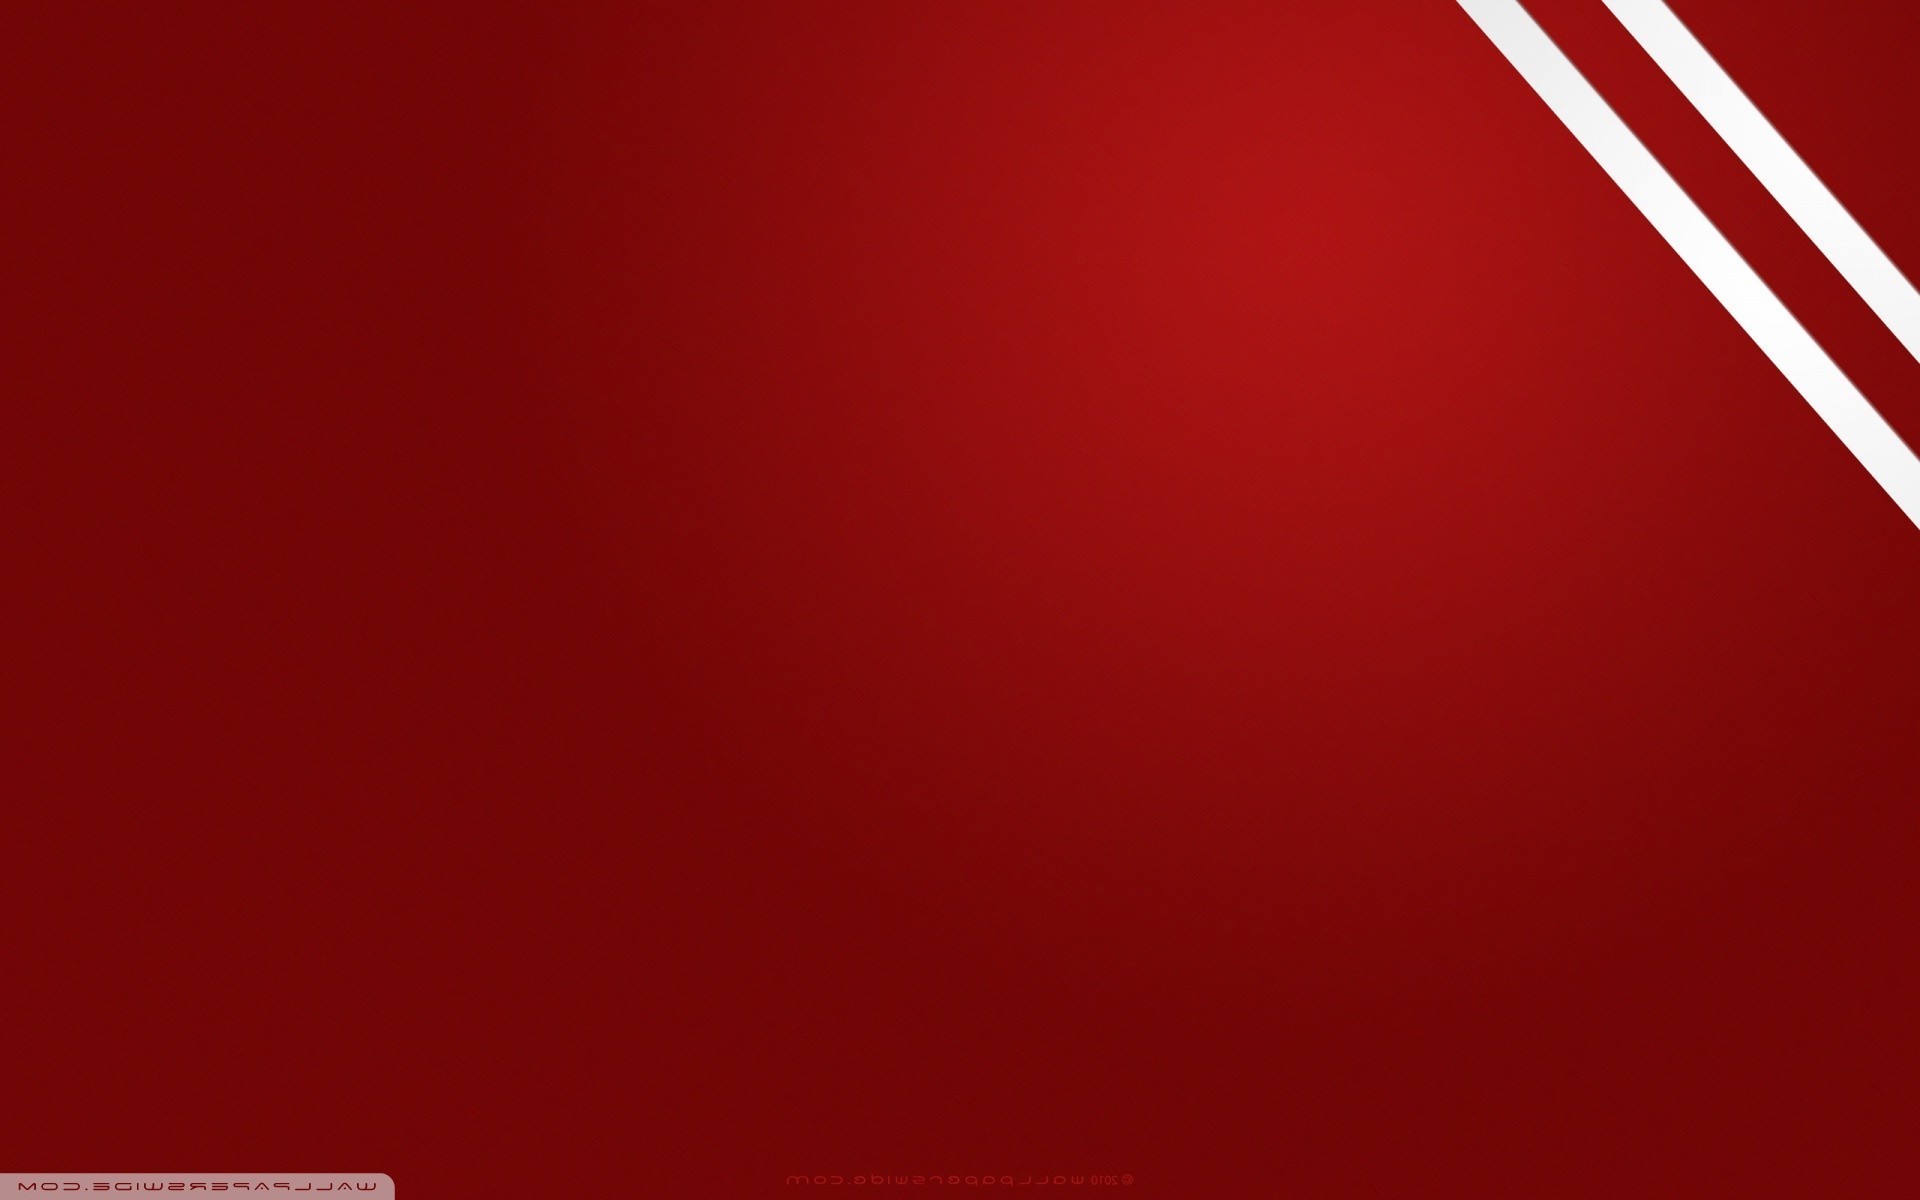 1920x1200 Red And White Wallpaper Backgrounds - WallpaperSafari